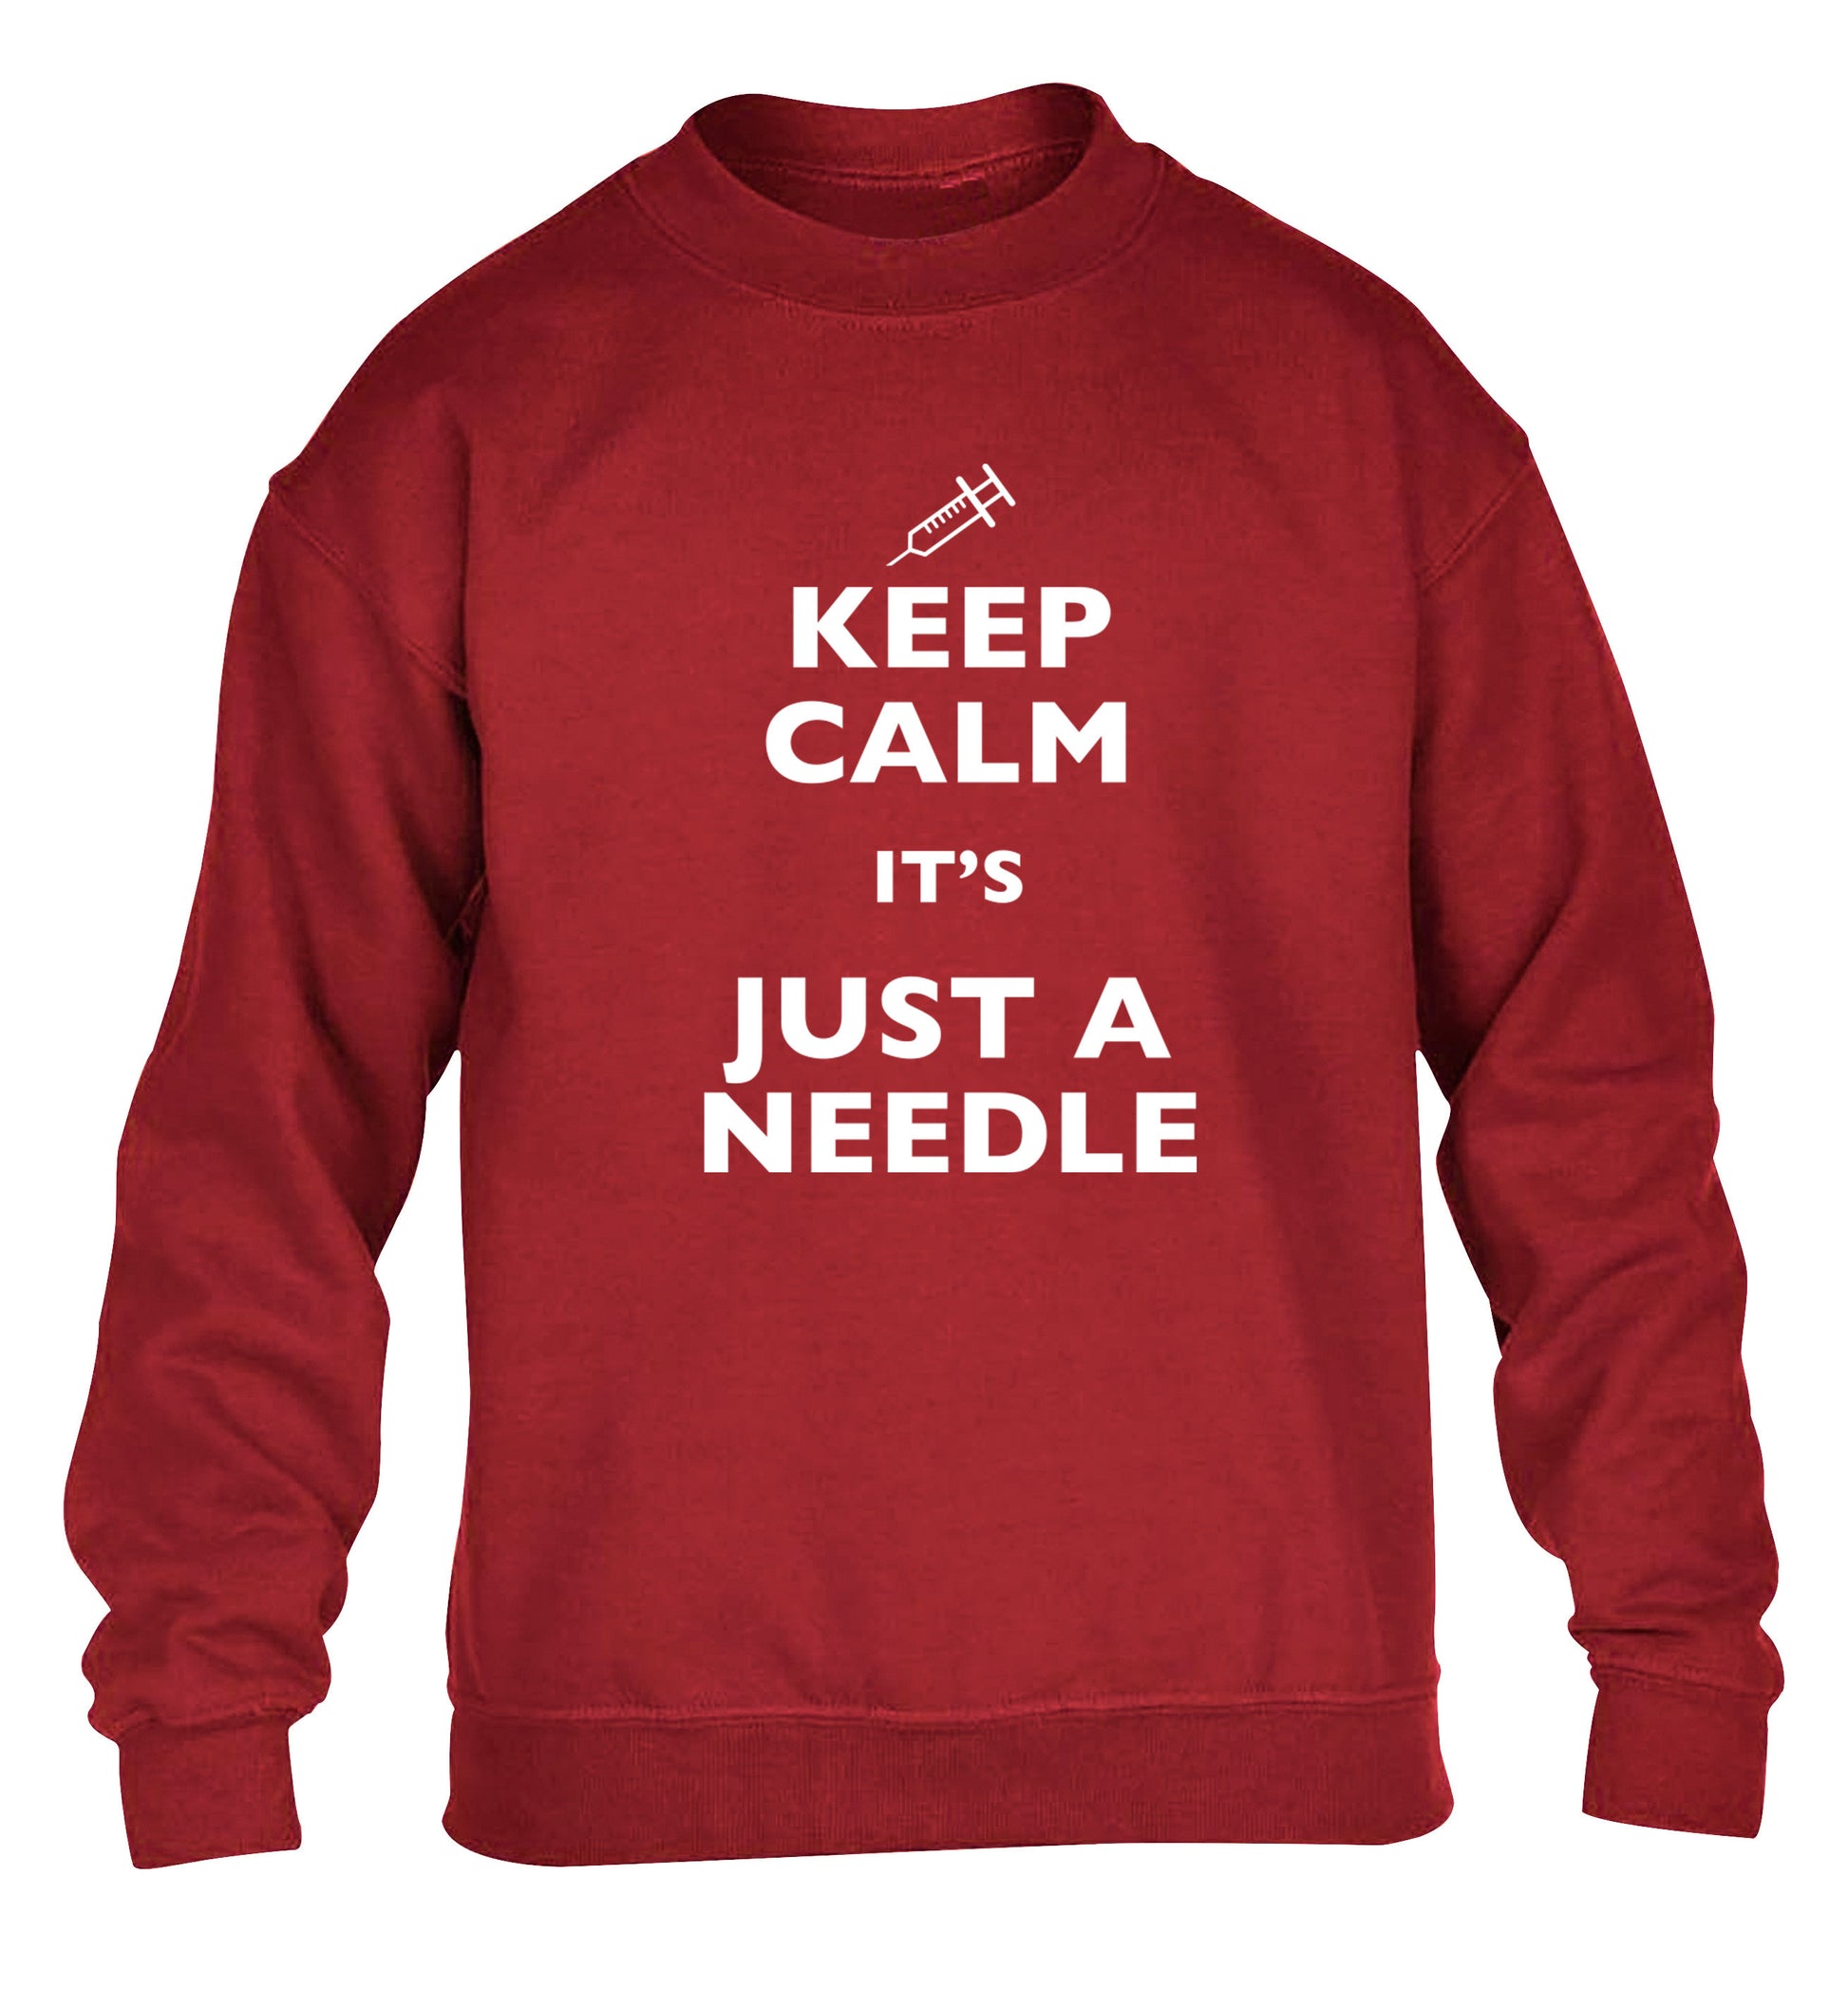 Keep calm it's only a needle children's grey sweater 12-14 Years